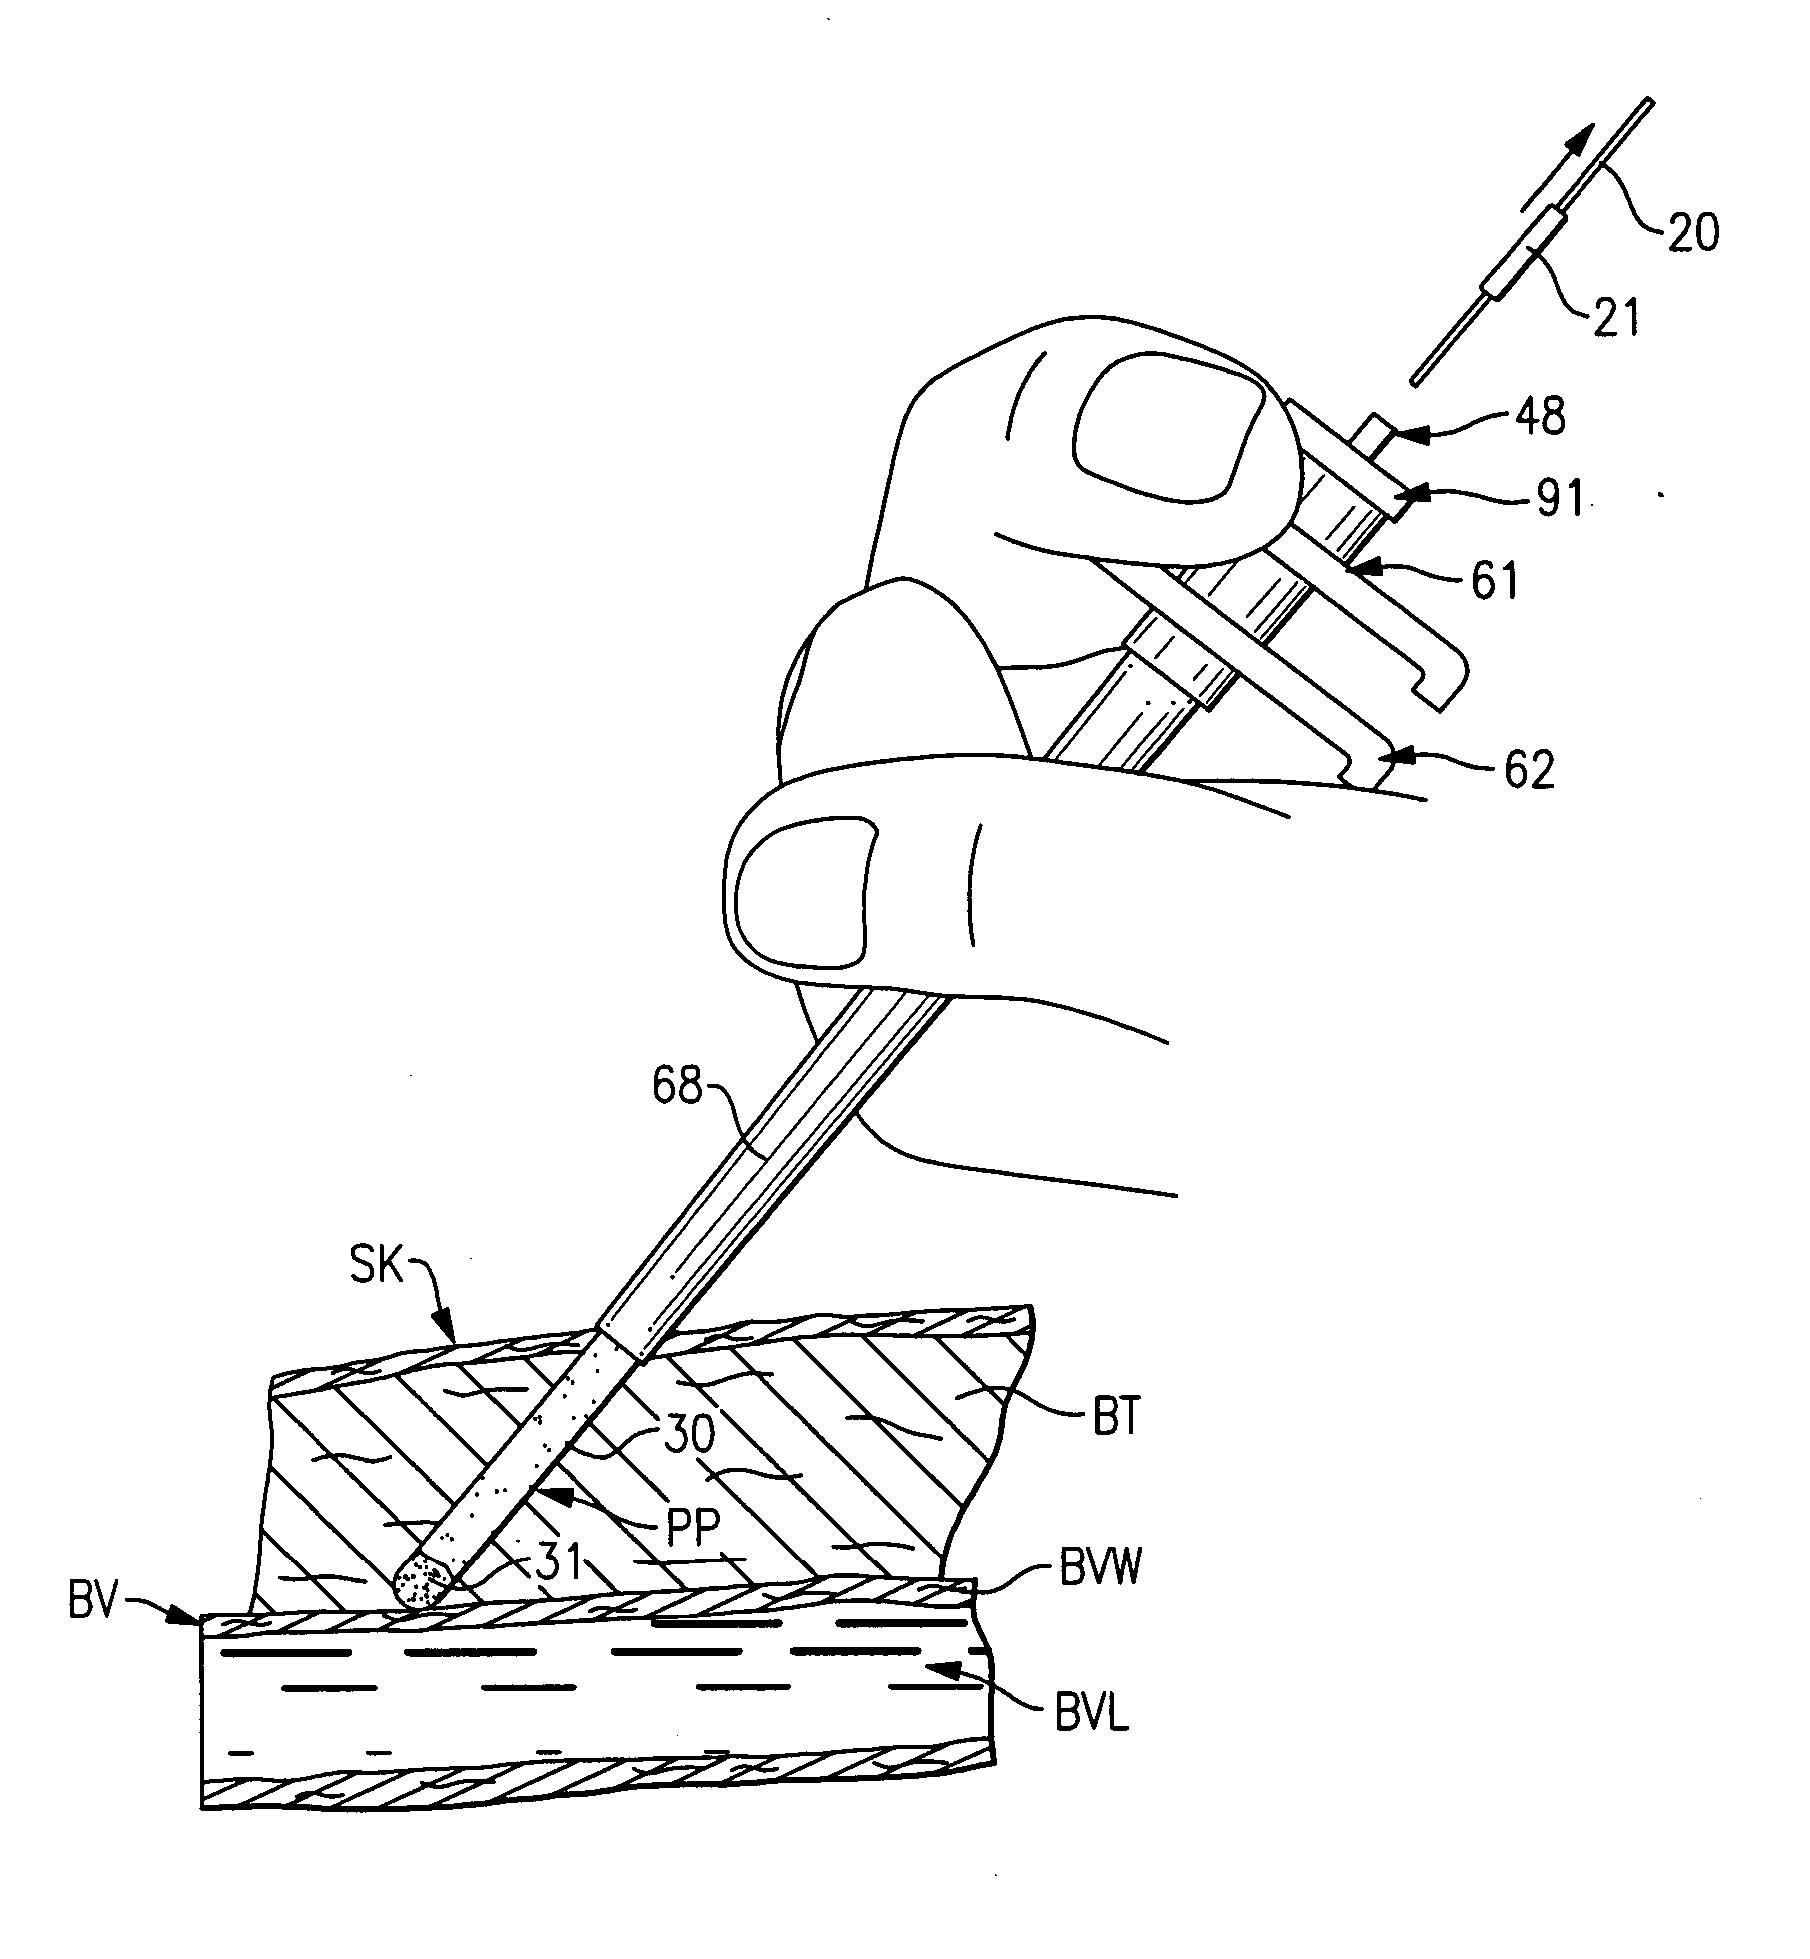 Percutaneous puncture sealing system